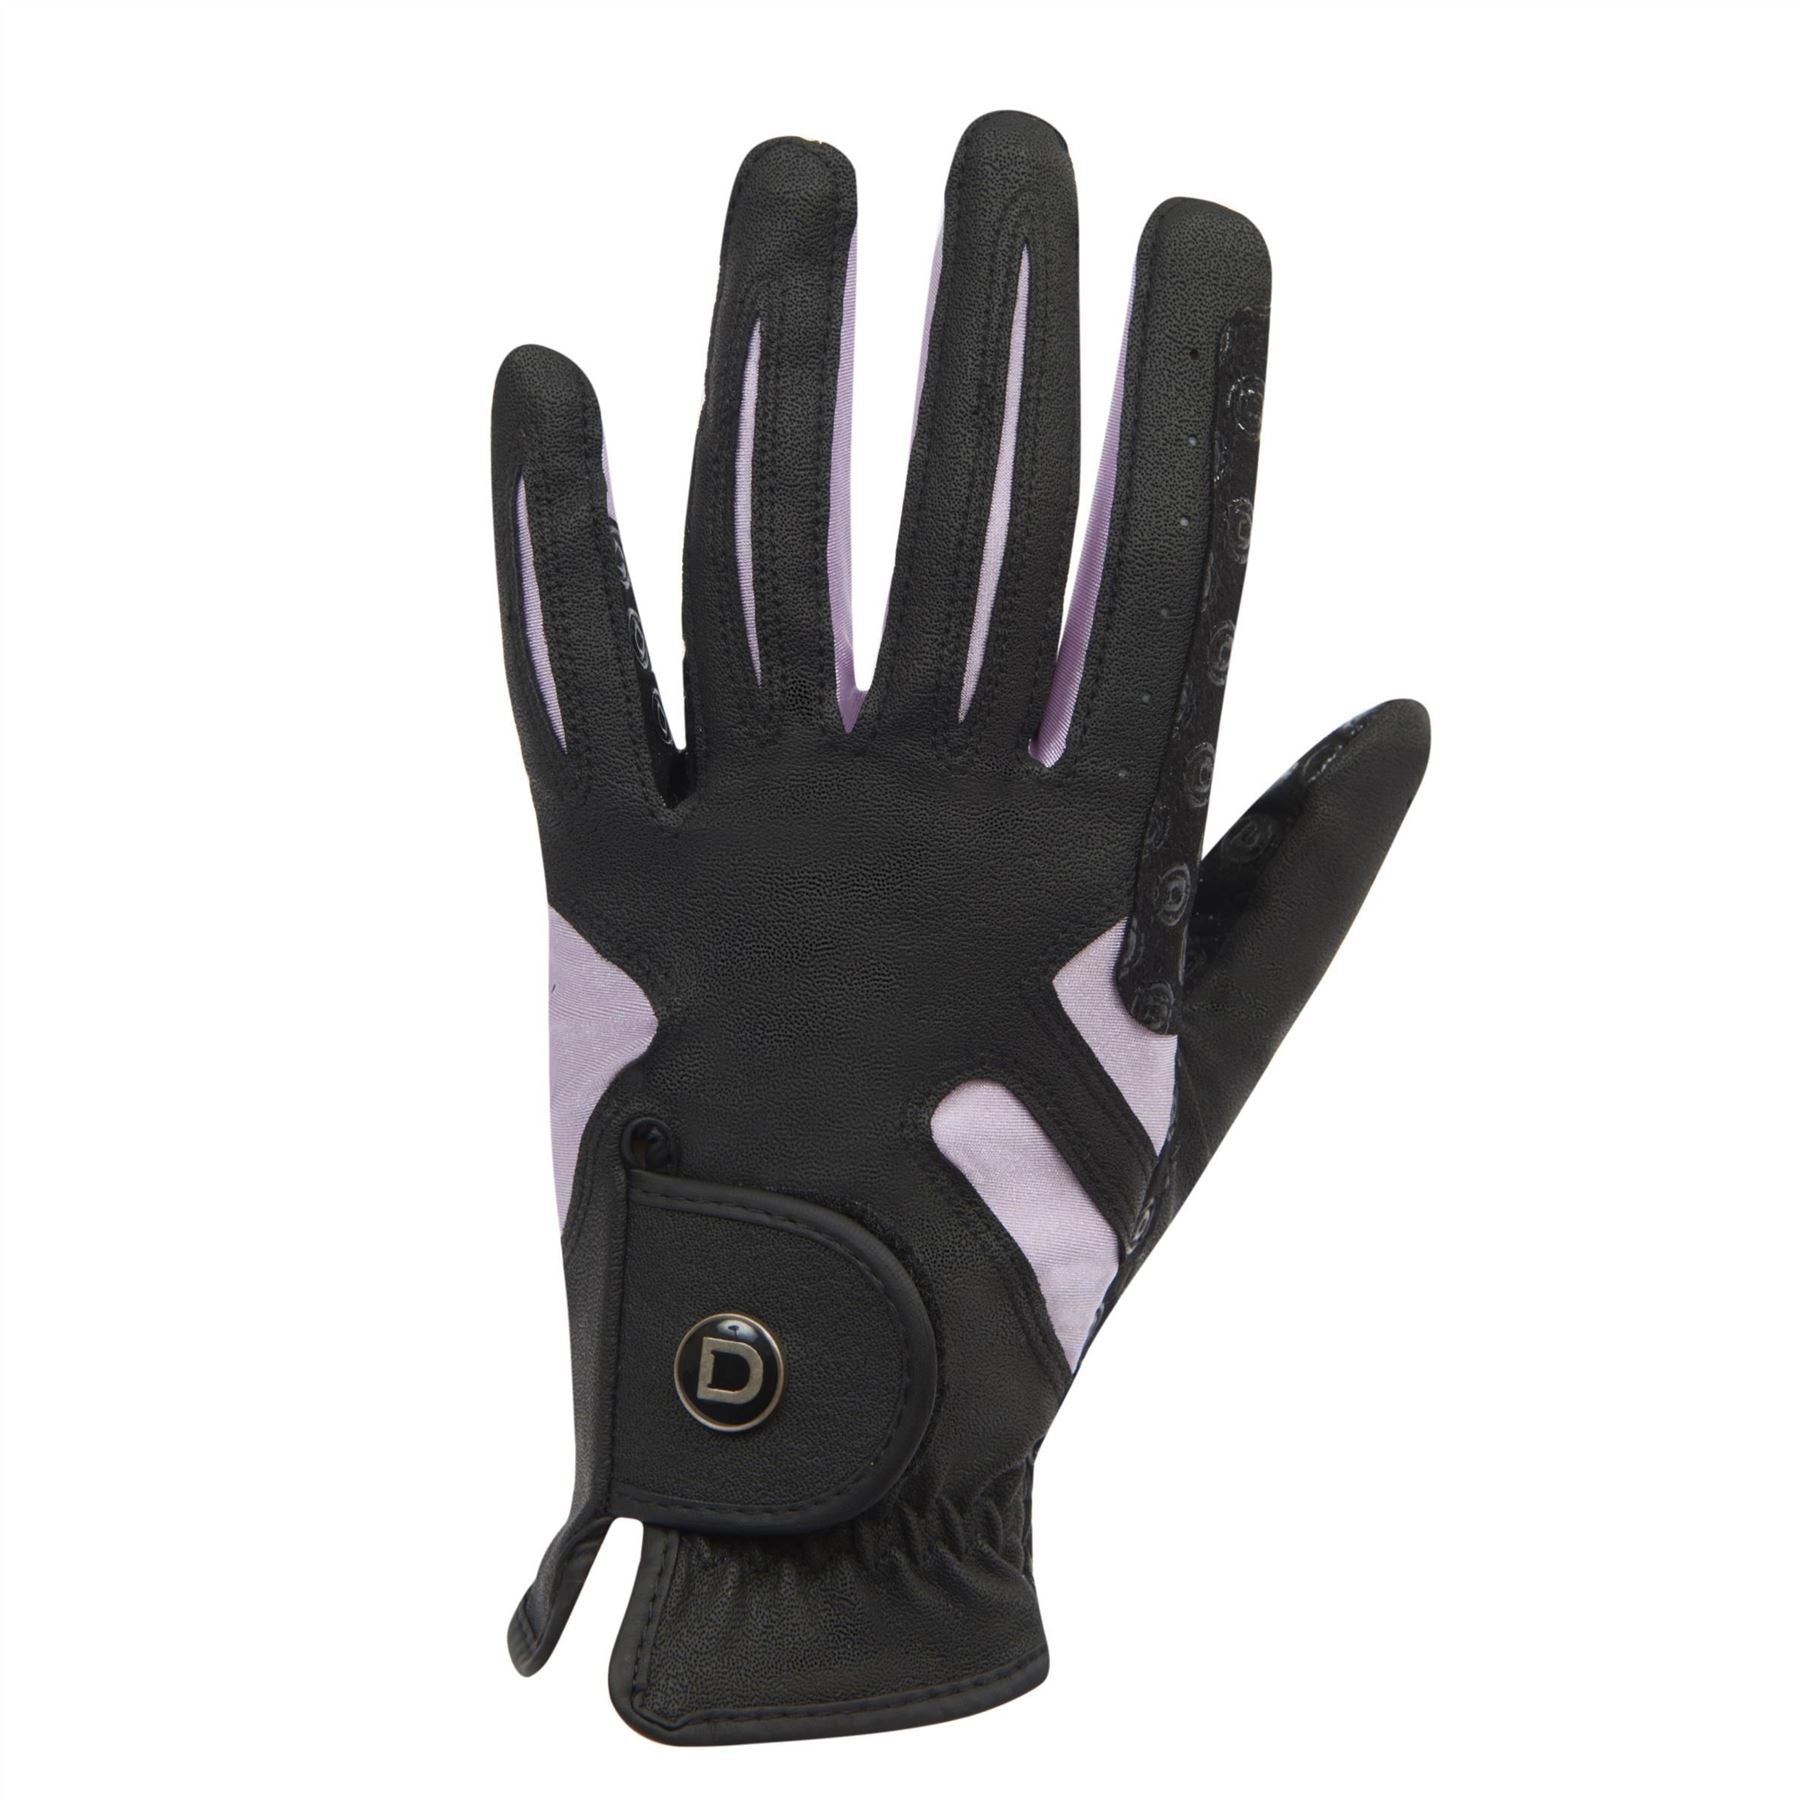 Dublin Cool-It Gel Horse Riding Gloves - Just Horse Riders